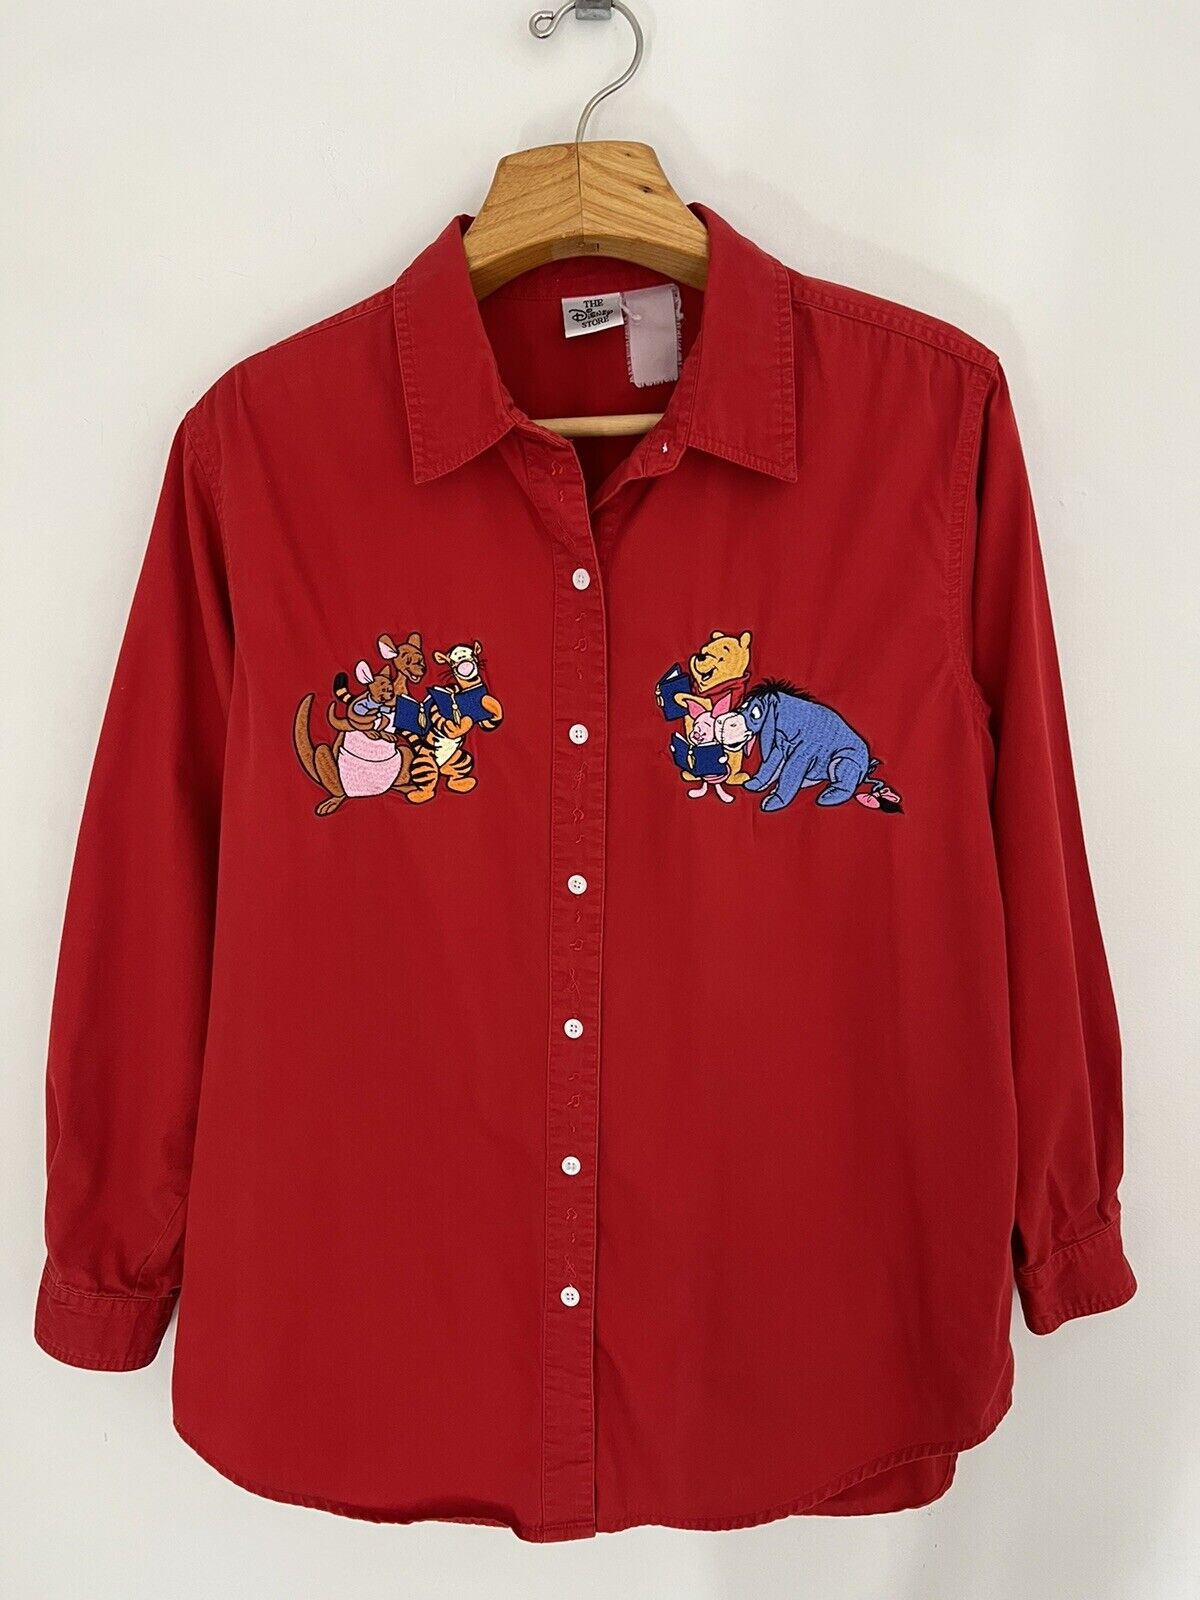 Vintage DISNEY STORE Women Winnie The Pooh Shirt Sz L Red Button Up Embroidered